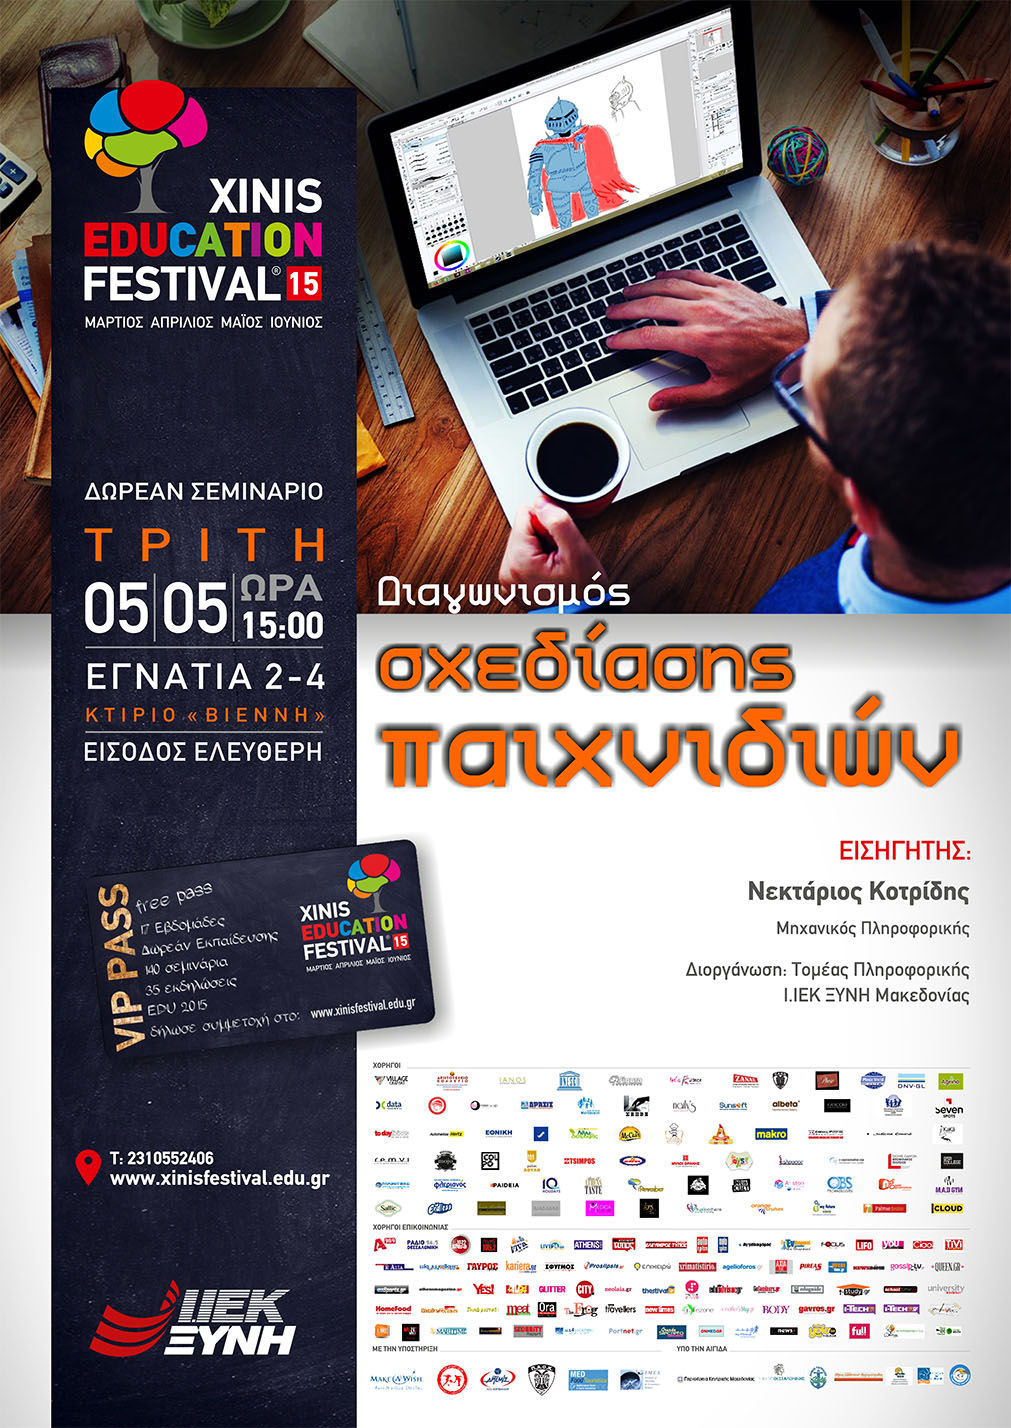 Xinis Education Festival 2015: It’s all about Gaming @ ΙΕΚ ΞΥΝΗ Μακεδονίας